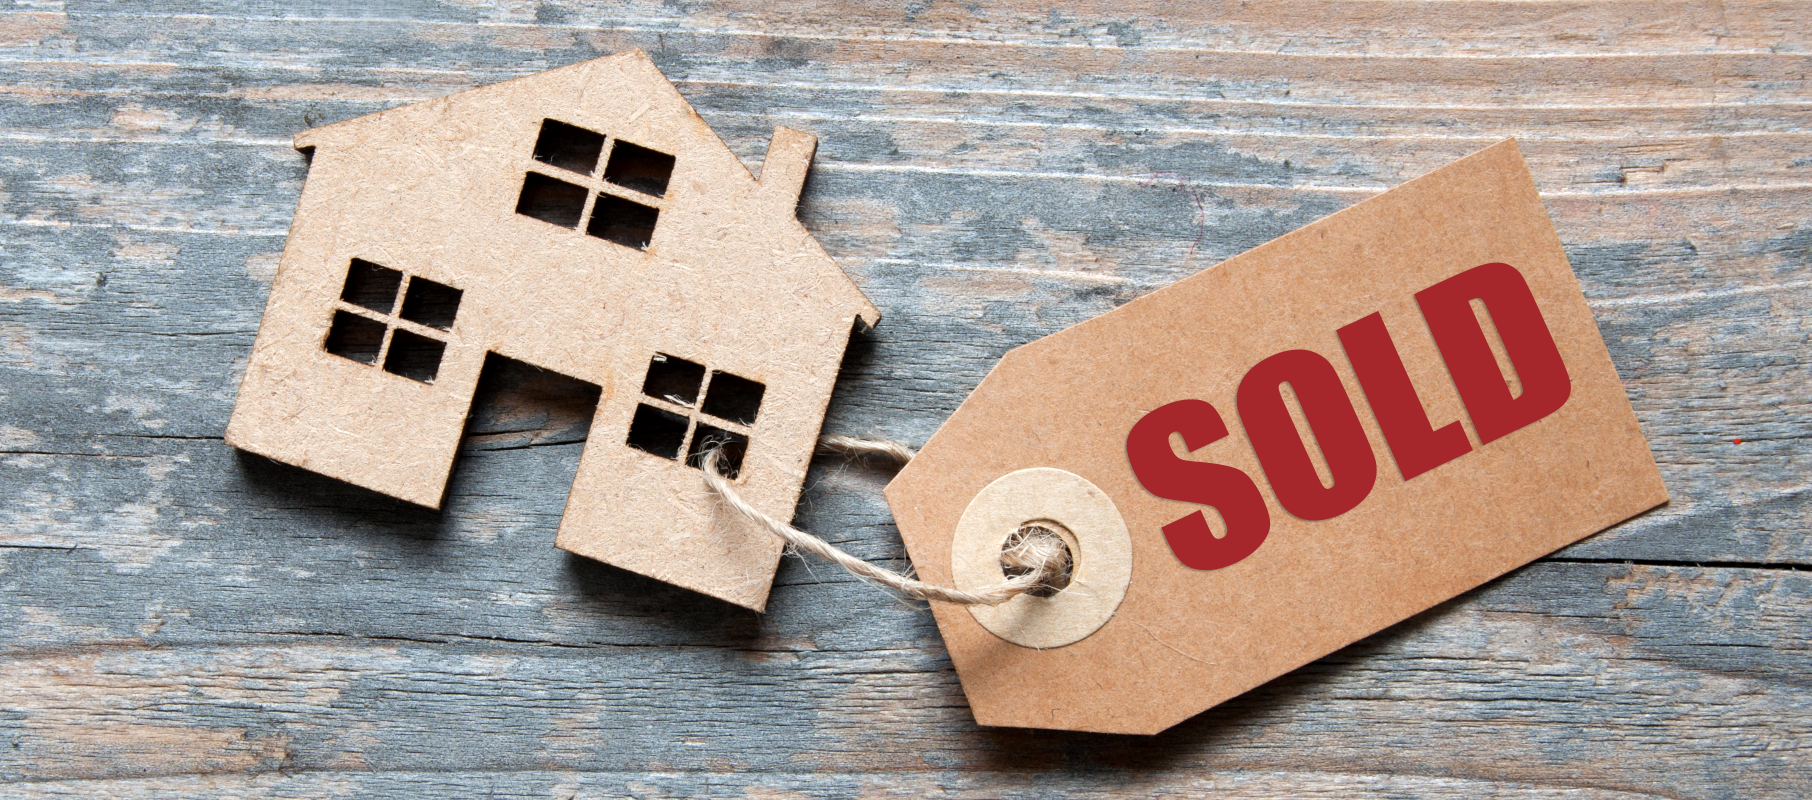 How To Sell A Home With A Lien In Ohio